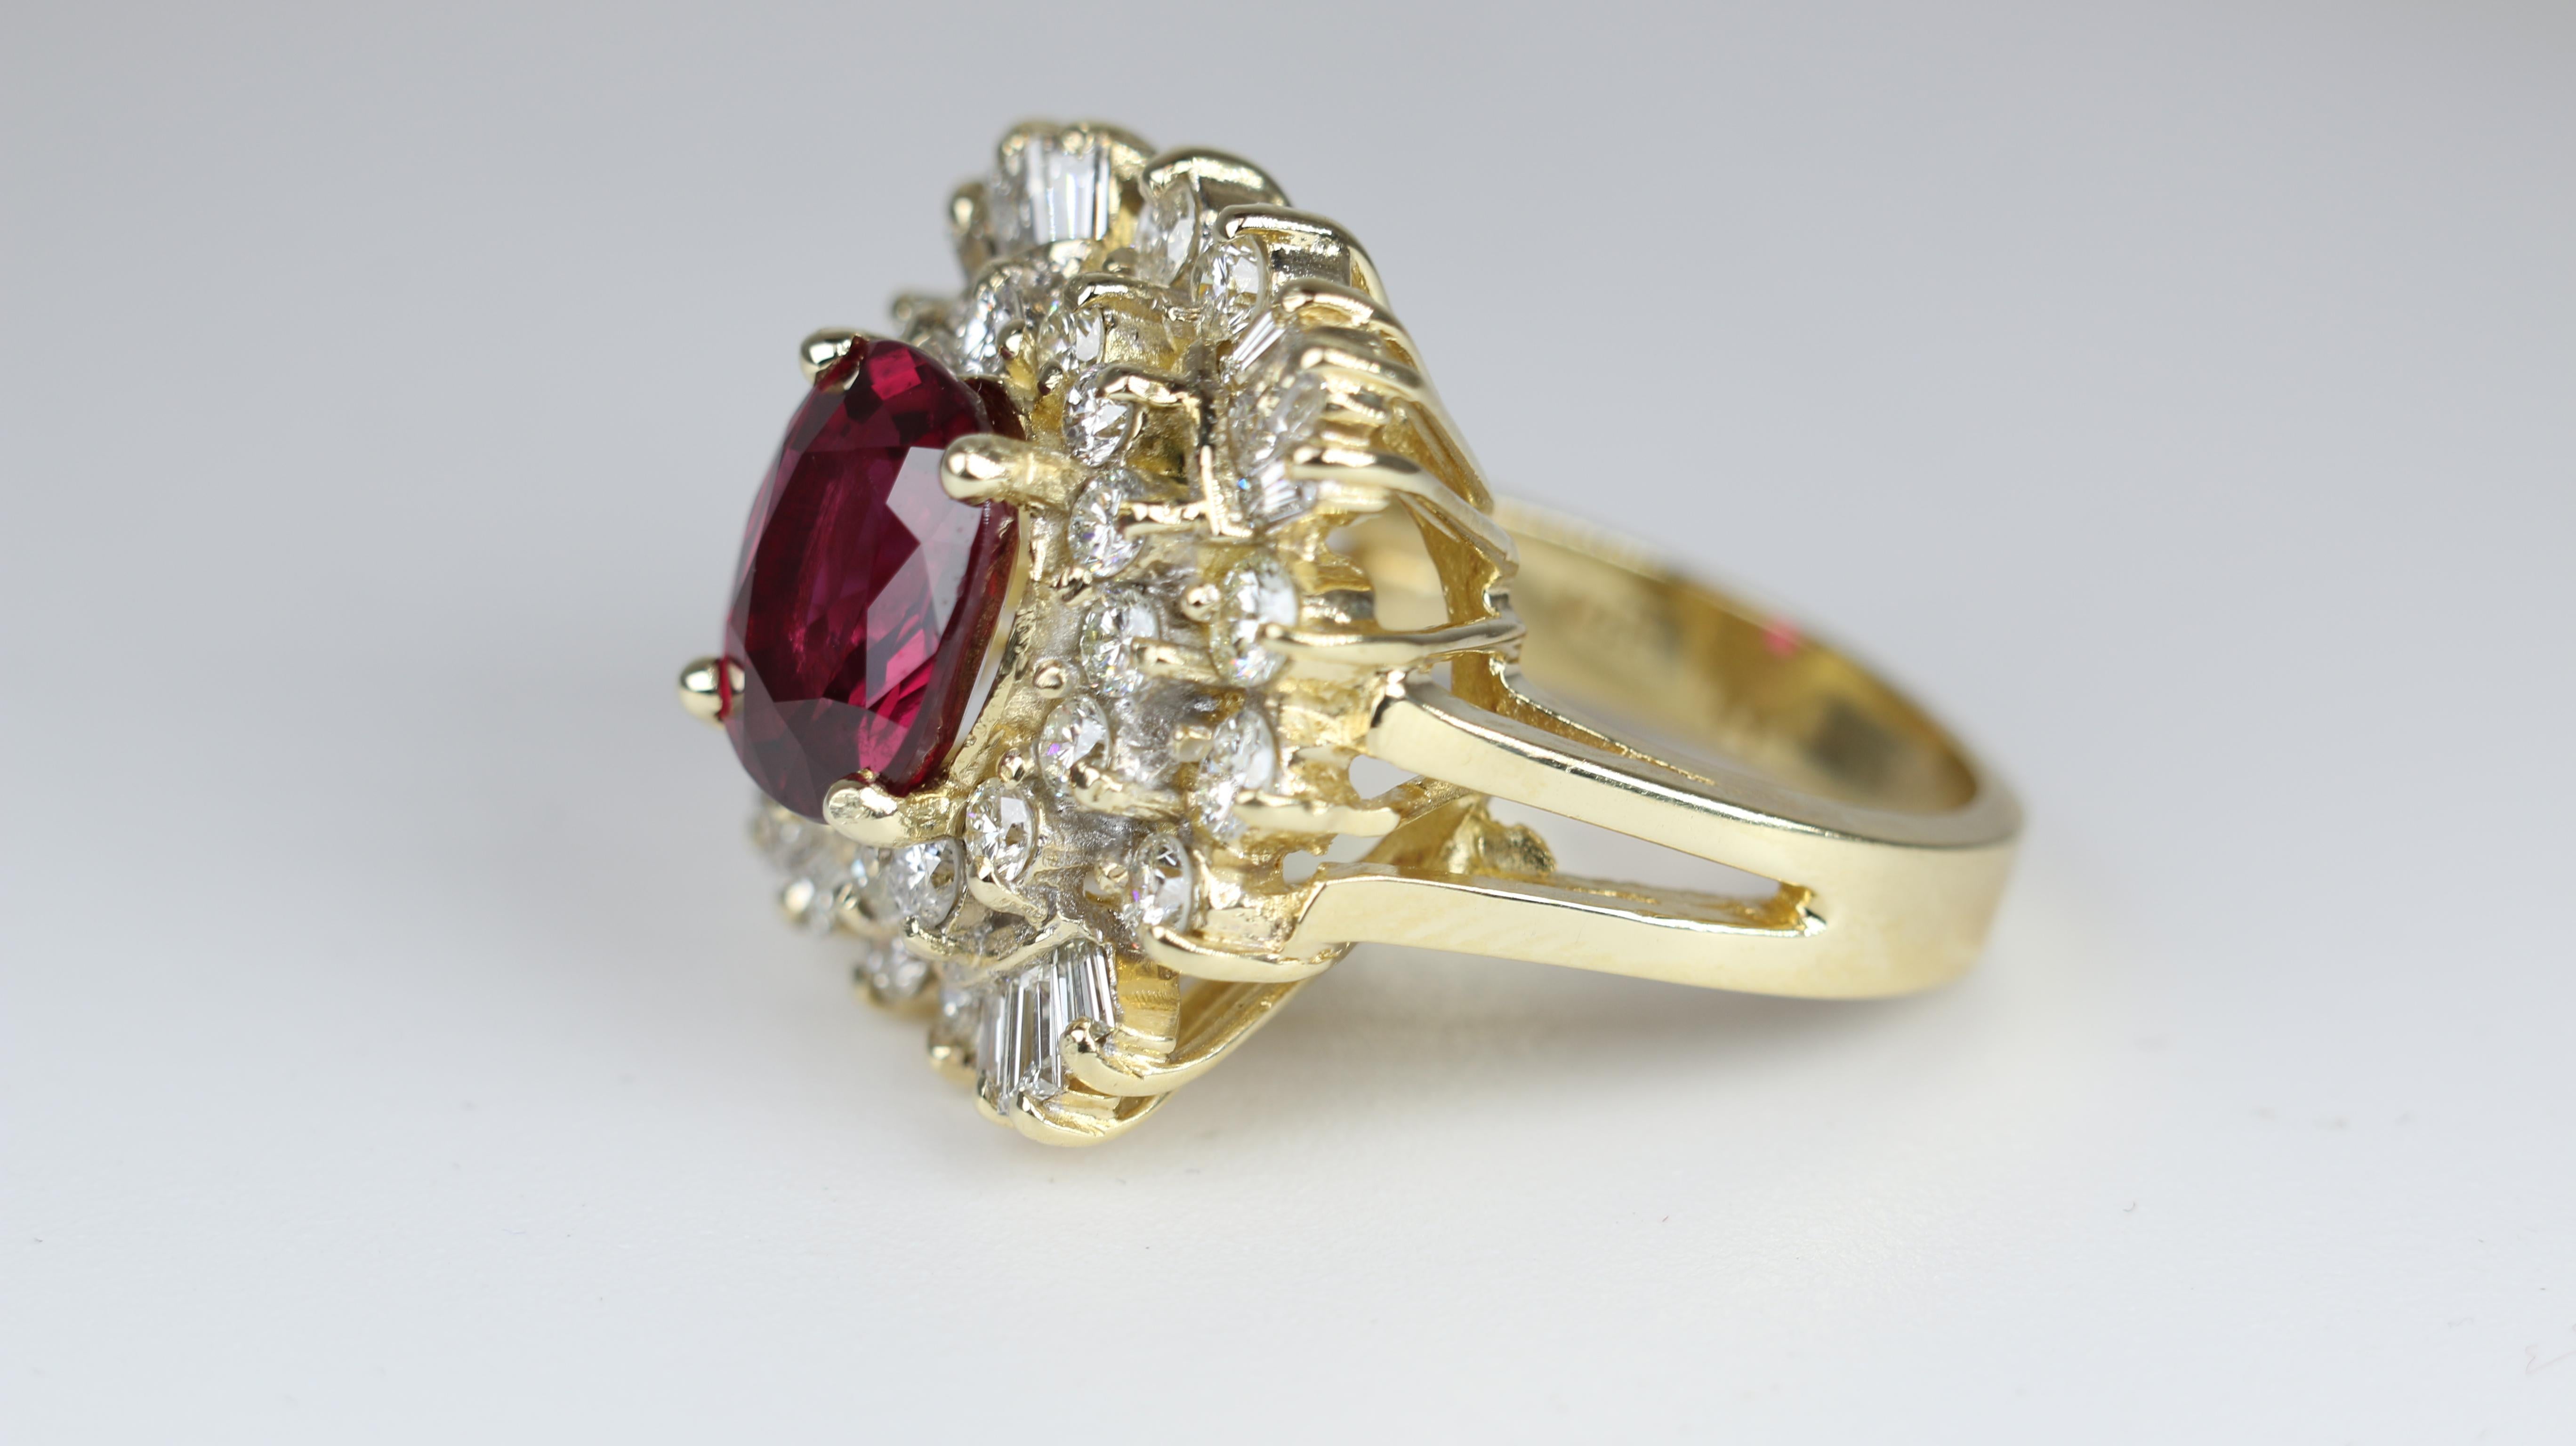 Rare Burmese Ruby and Diamond Ring set in 14k Yellow Gold. 
RUBY: 8.5mm diameter, 10.5mm length
Marked 14k dbs
Size 6.75